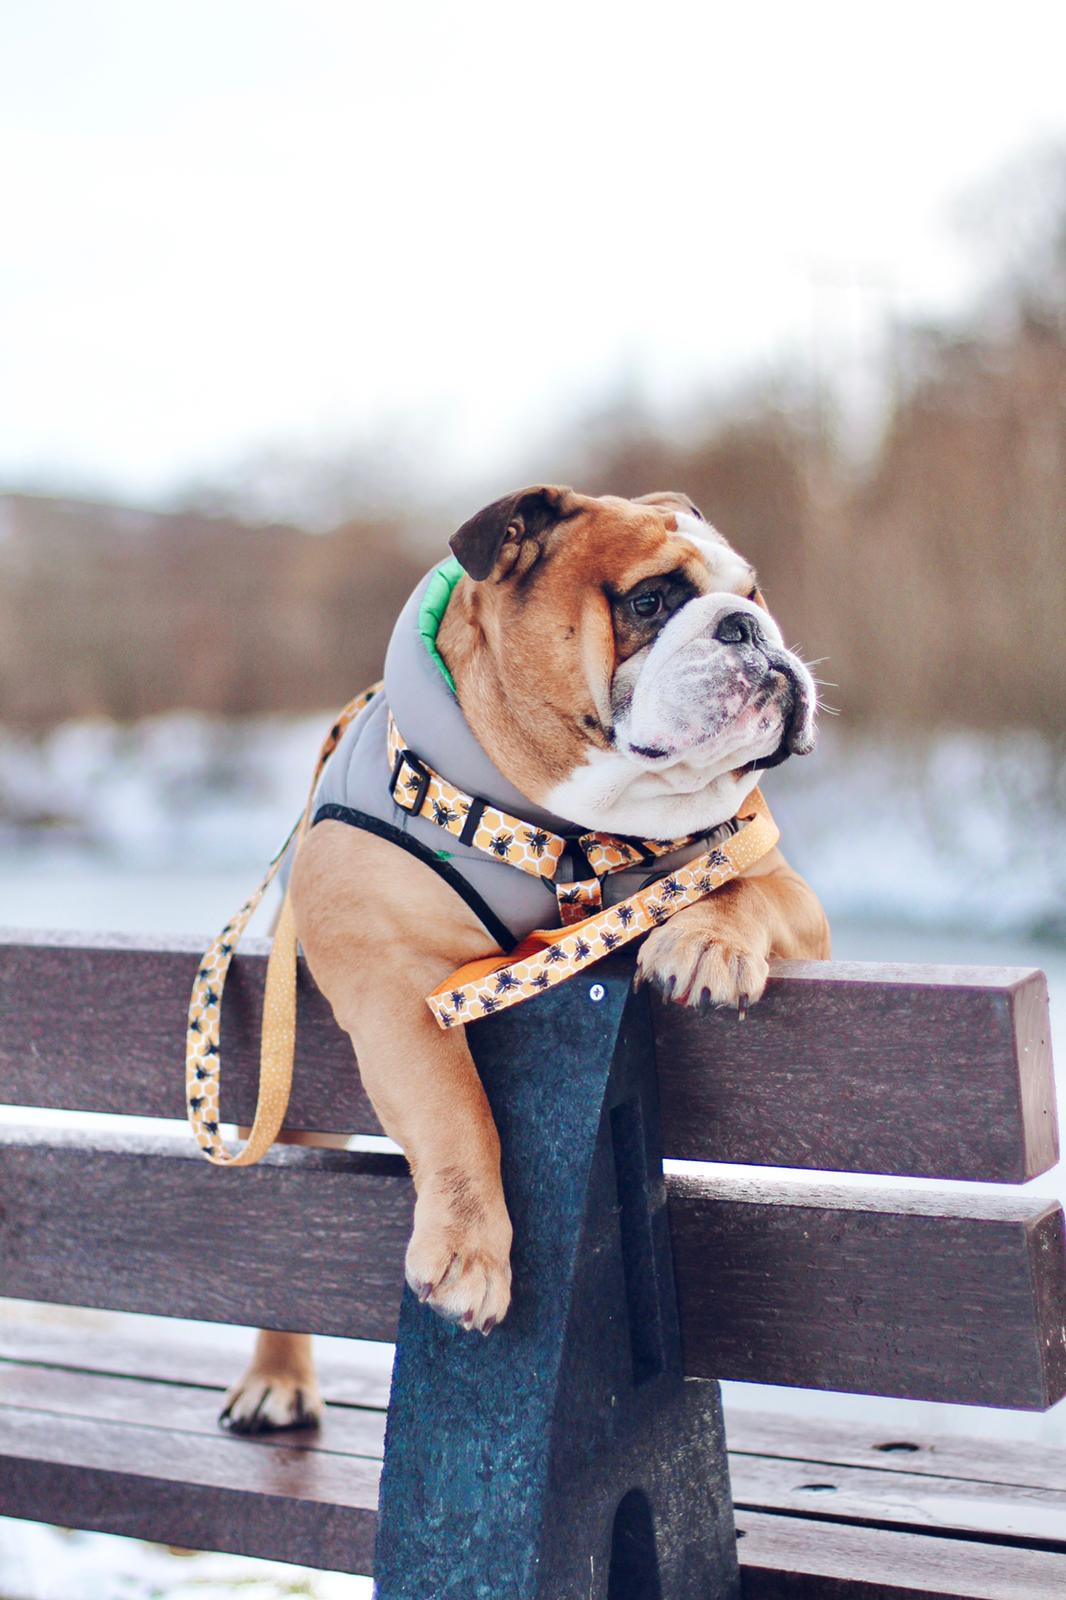 Bulldog wearing a TopDog Harnesses Bee Kind Strap dog harness stood up on a bench